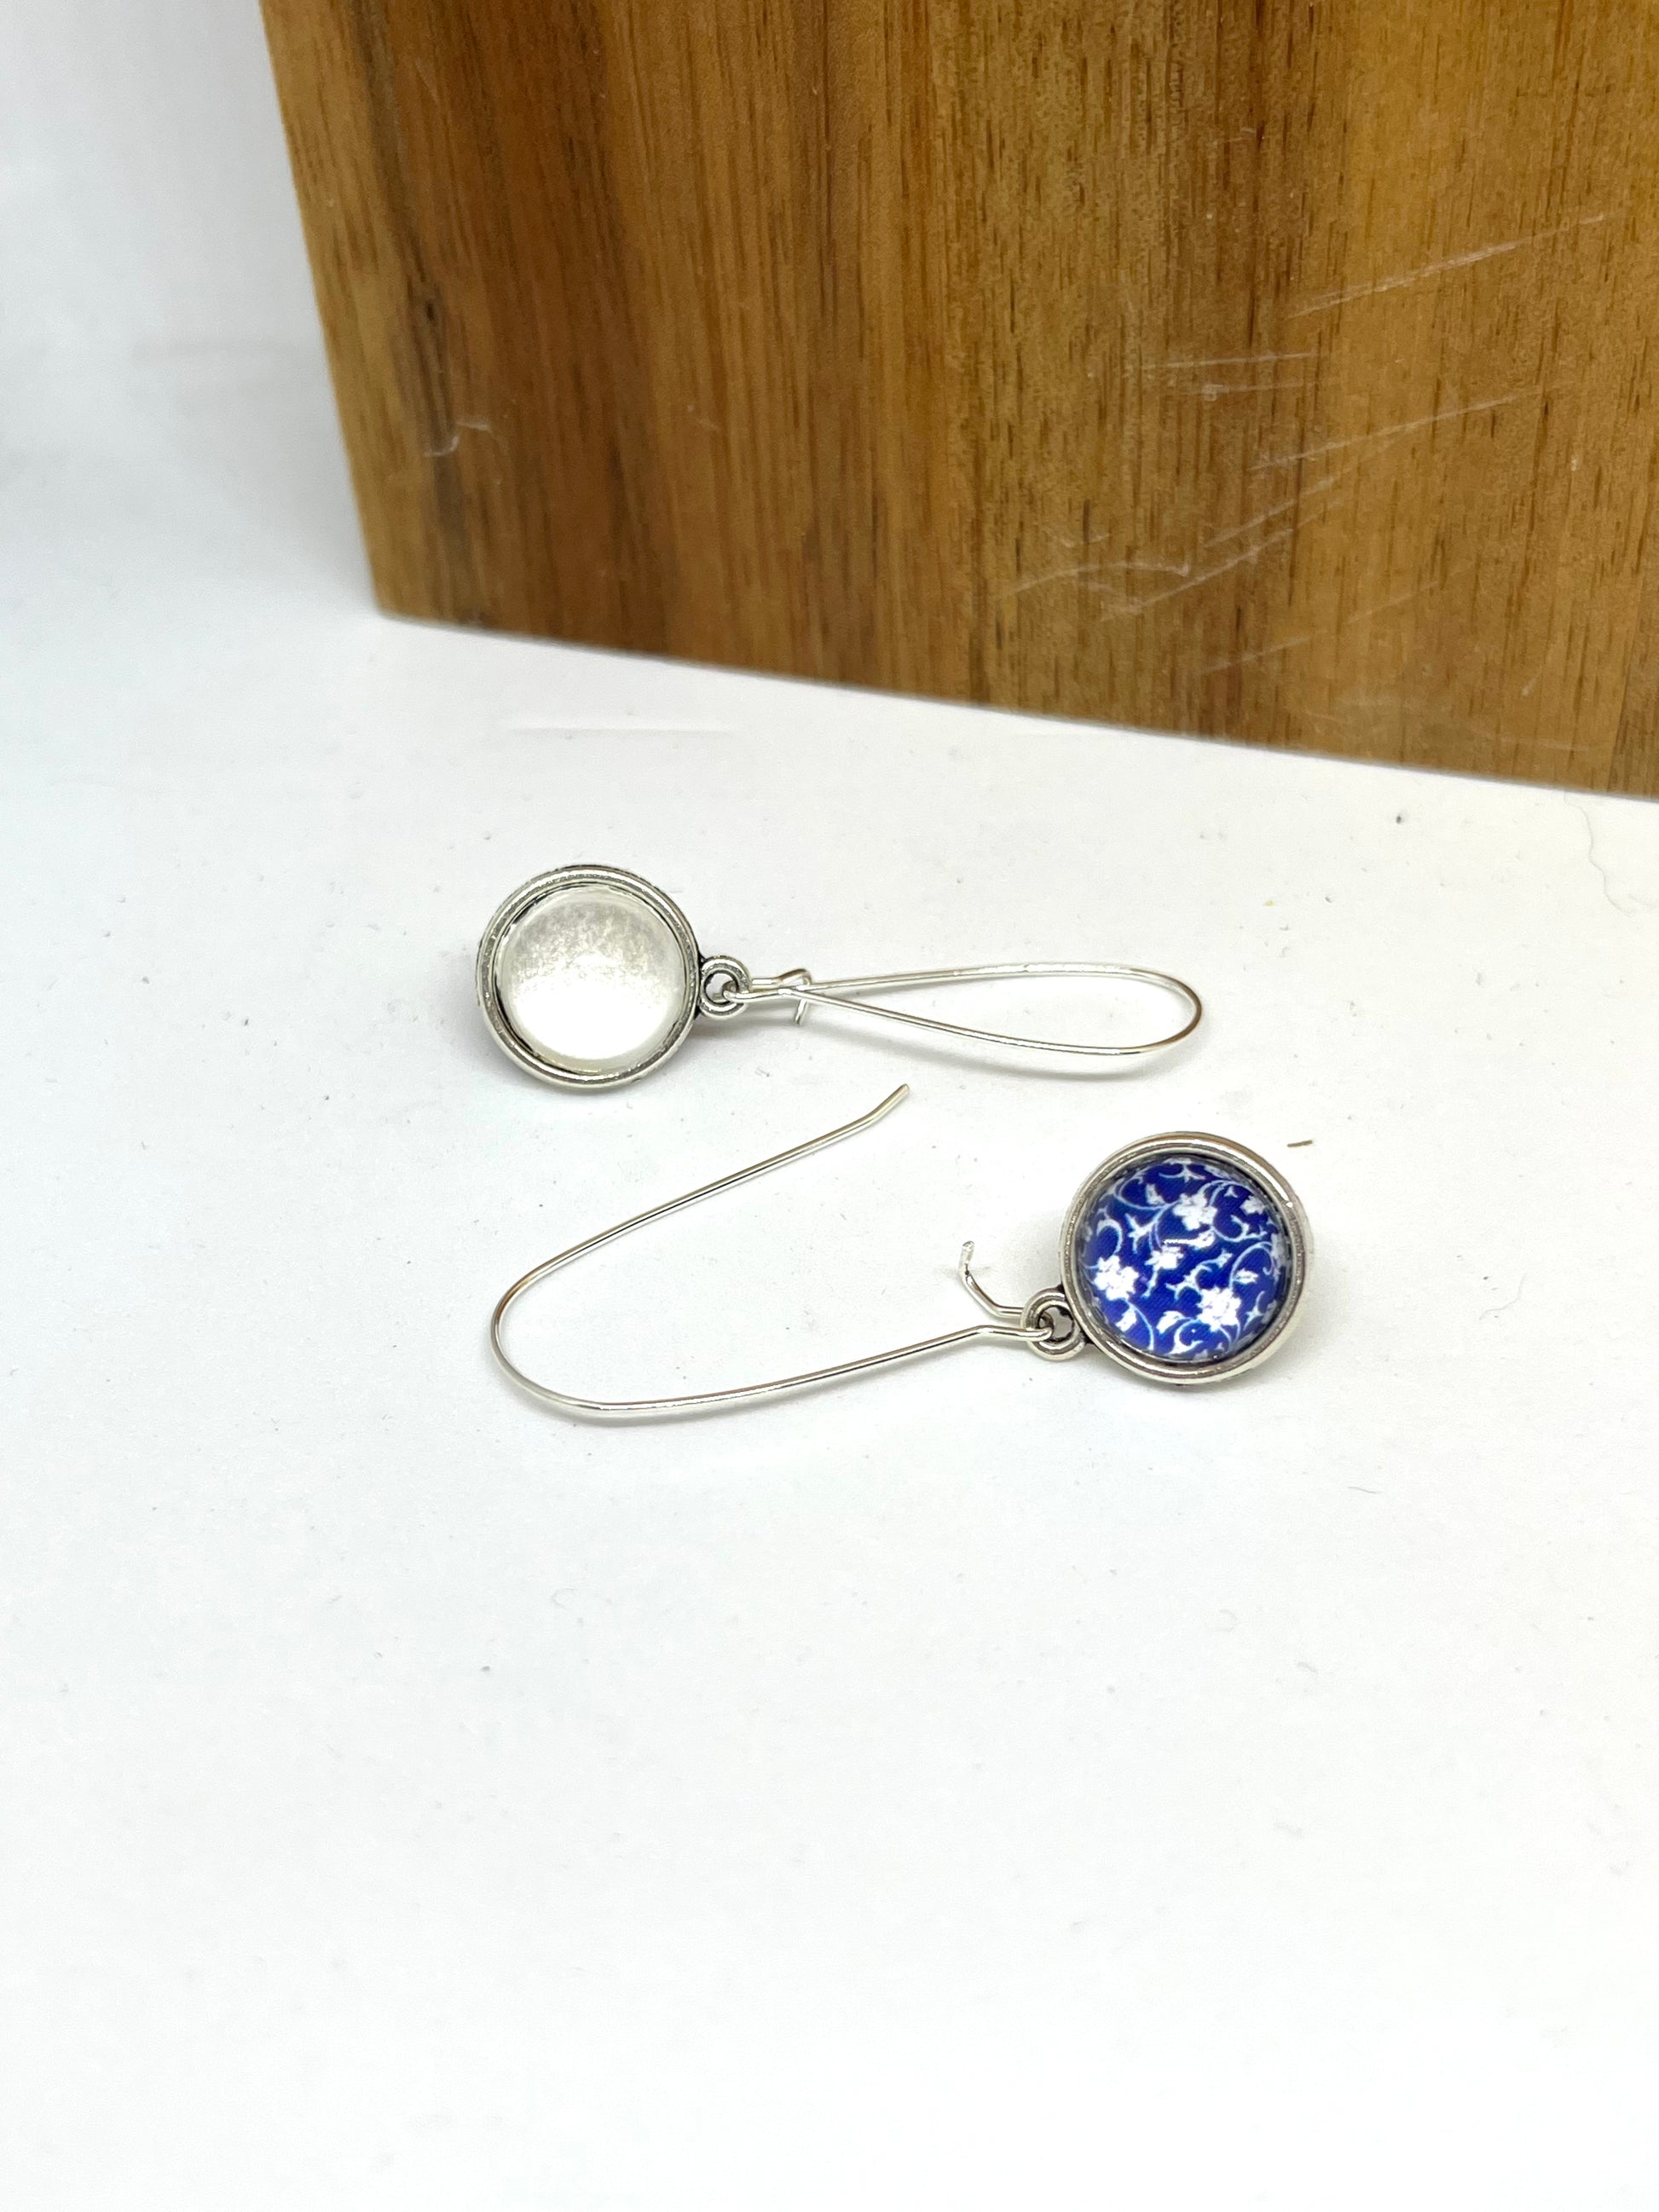 Double sided glass dome earrings with blue china pattern on one side and pearl on the other